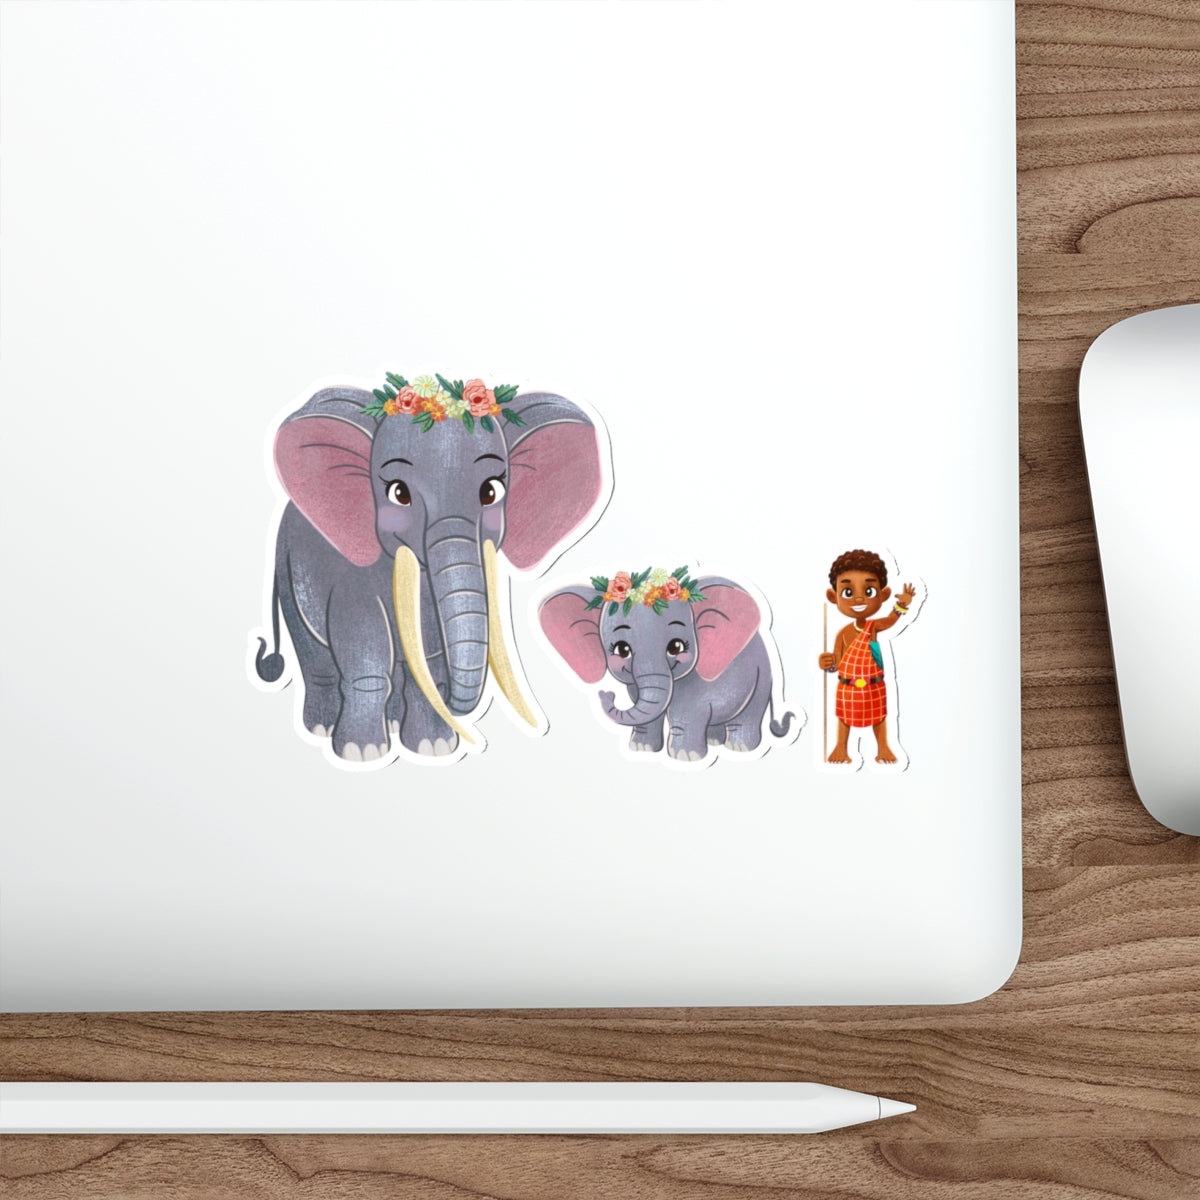 Stickers of Amara with her Loving Mother, Lila  and Yaro with Flowers as Crowns | Die-Cut Water-resistant Elephant Stickers | Outdoor and Indoor Stickers